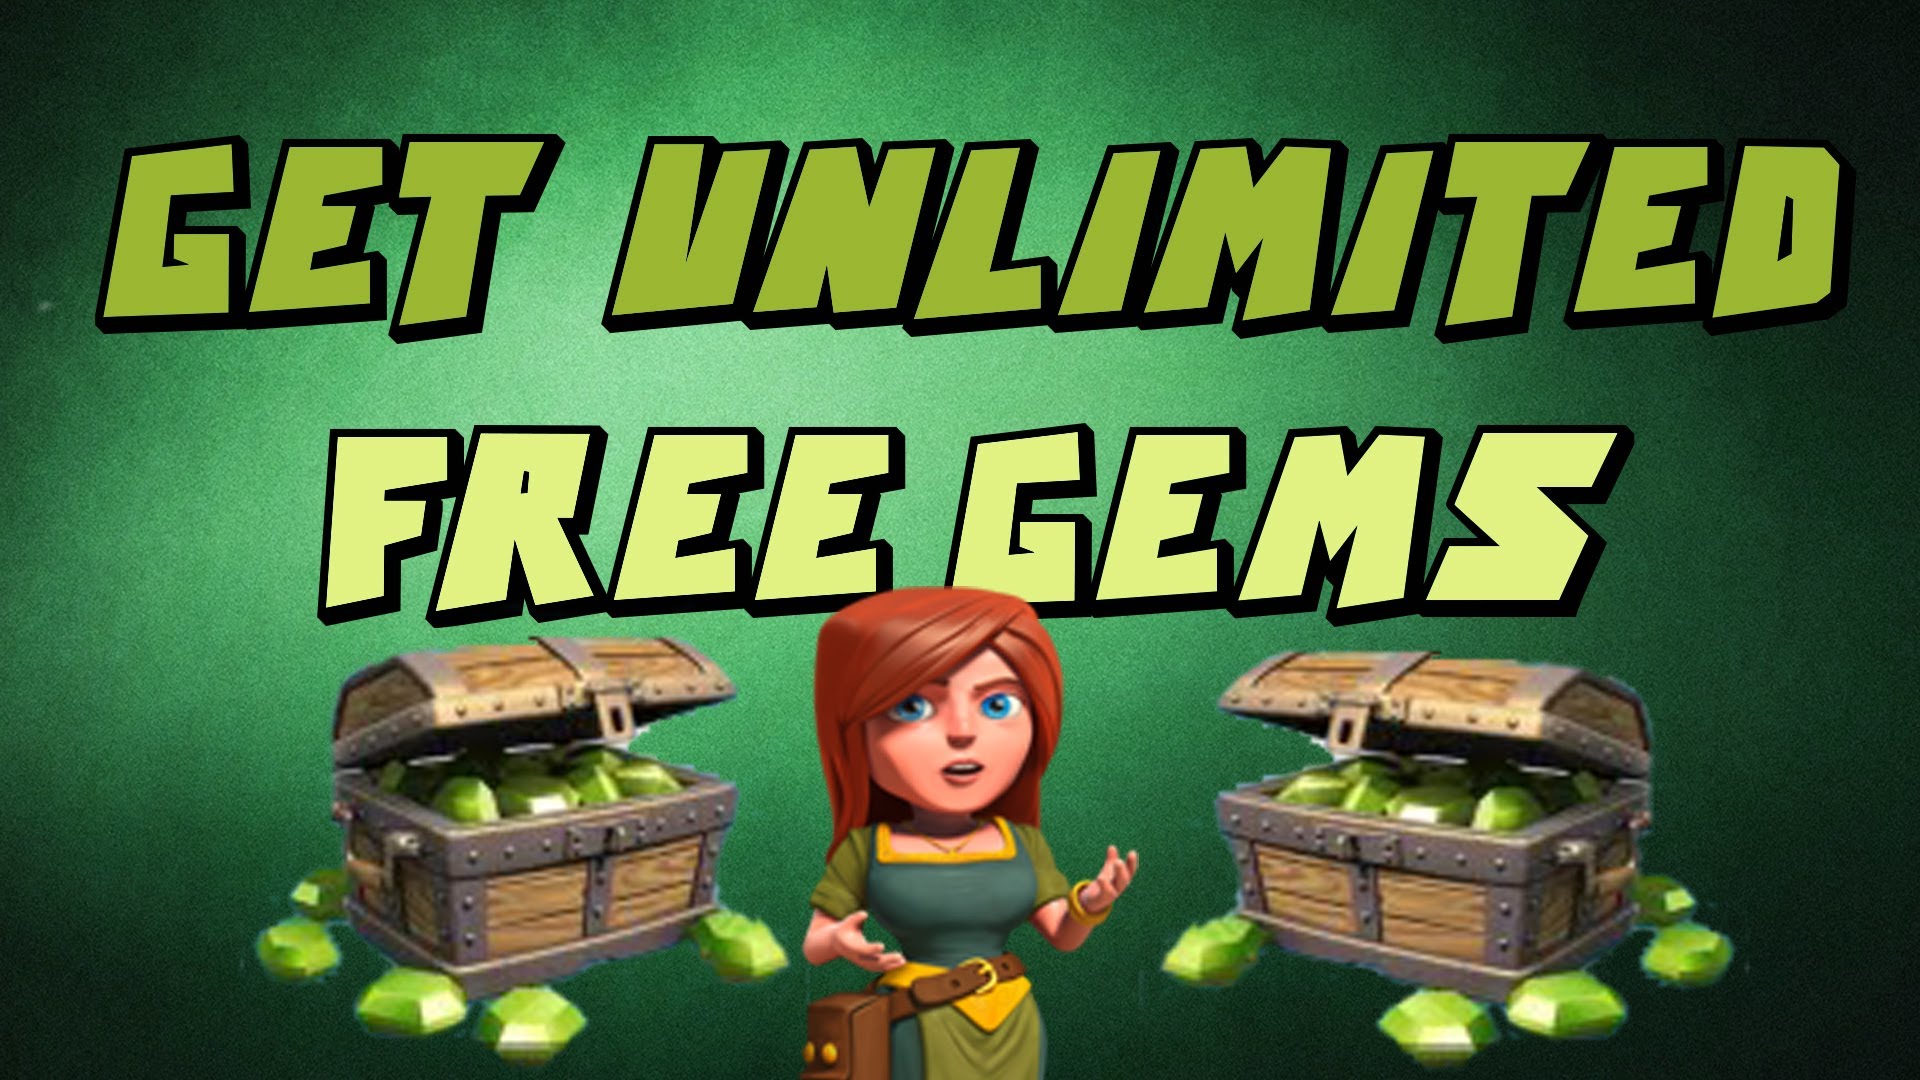 How To Get Unlimited Free Gems In Clash of Clans